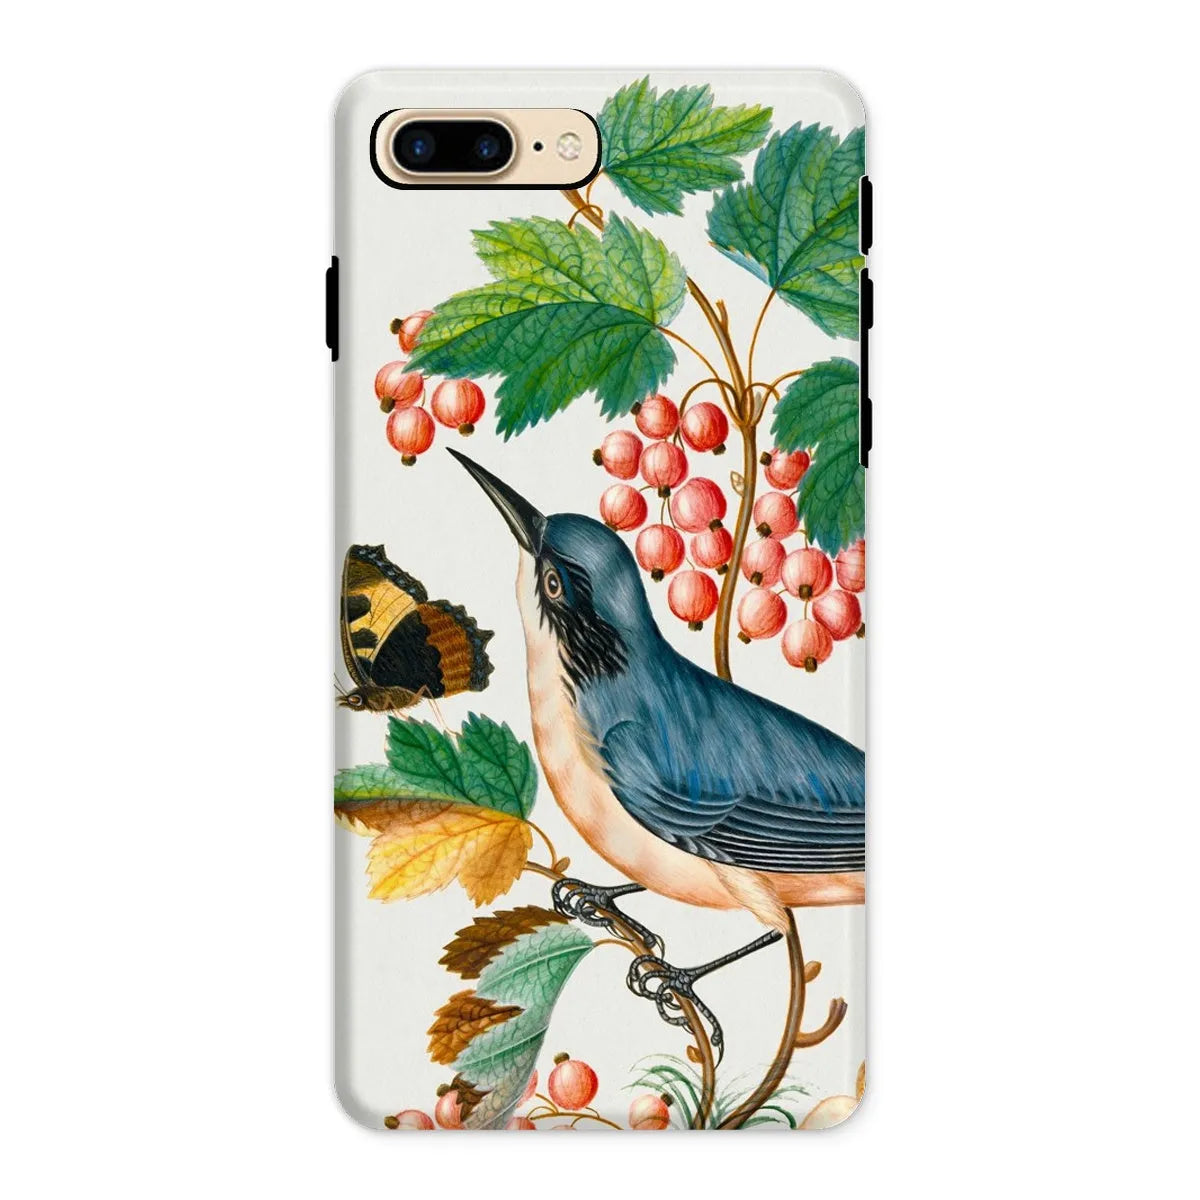 Warbler Admiral Wasps & Ants - Art Phone Case - James Bolton - Iphone 8 Plus / Matte - Mobile Phone Cases - Aesthetic